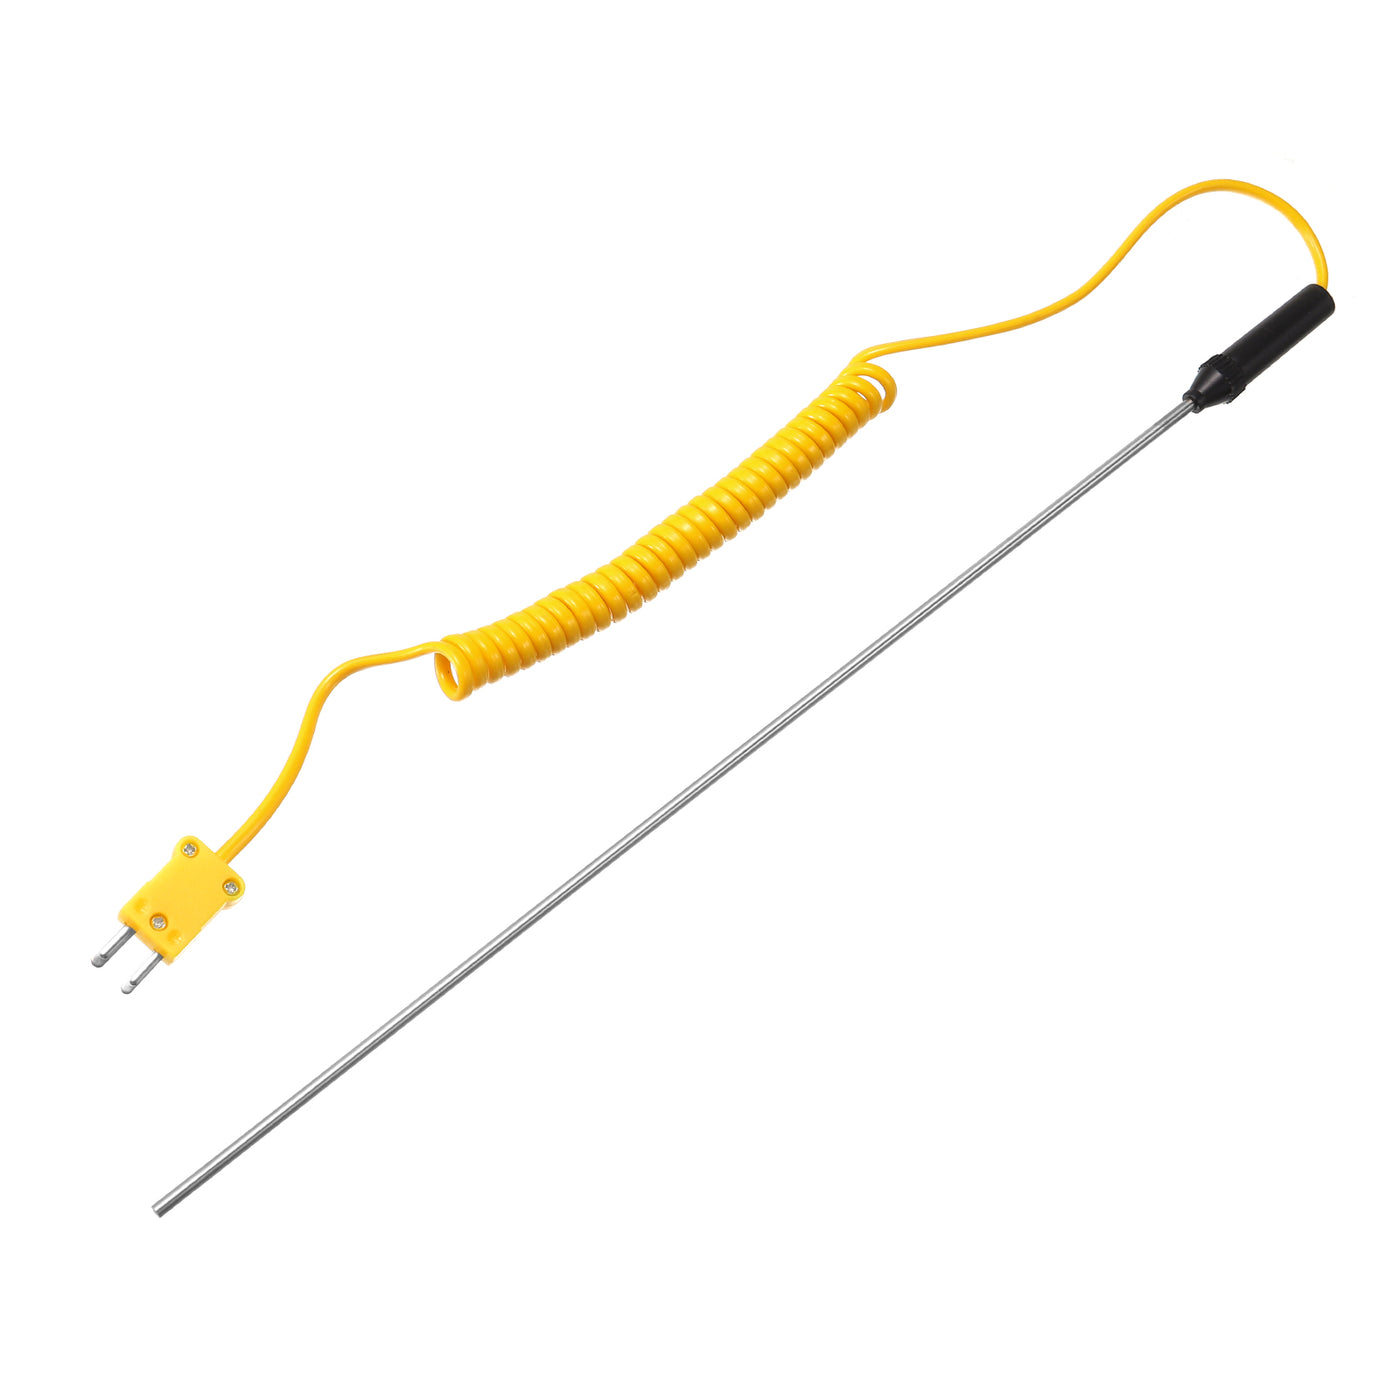 Harfington Surface Thermocouple 12" Probe K Type Yellow Coiled Wire -50 to 650C